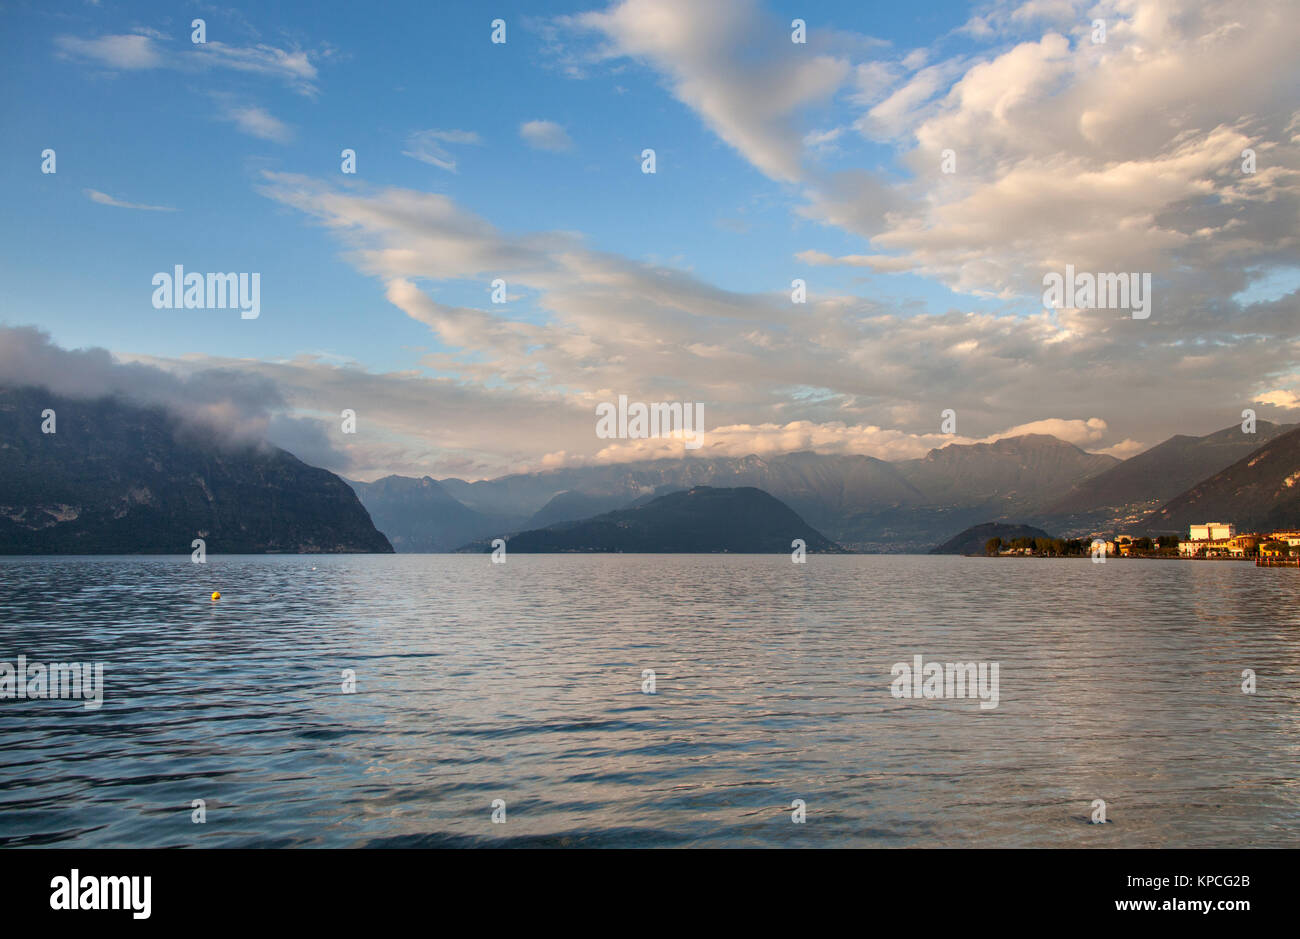 Lake Iseo, Italy. Picturesque dusk view of Lake Iseo, with the town of Iseo on the right of the image and the island (and town ) of Monte Isola is in  Stock Photo